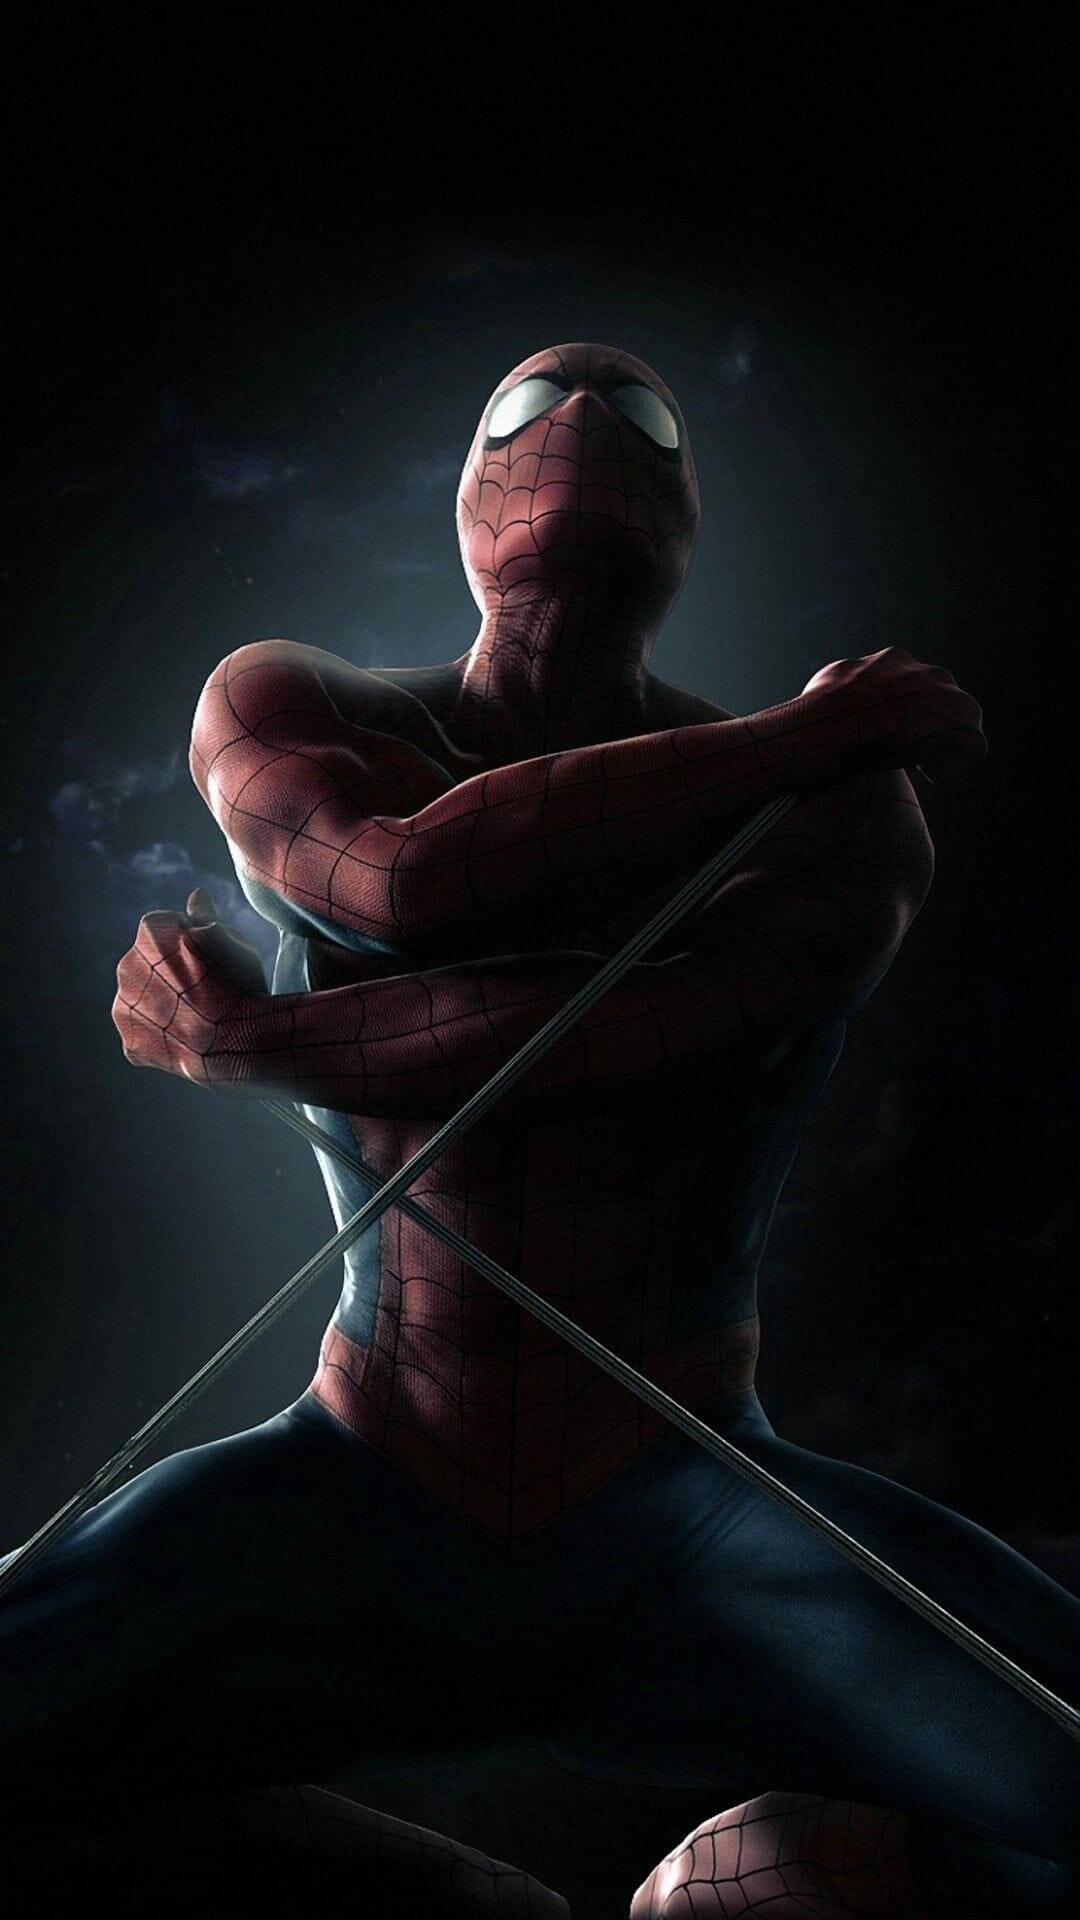 Marvel: Featured in several comic book series, the first and longest-lasting of which is The Amazing Spider-Man. 1080x1920 Full HD Wallpaper.